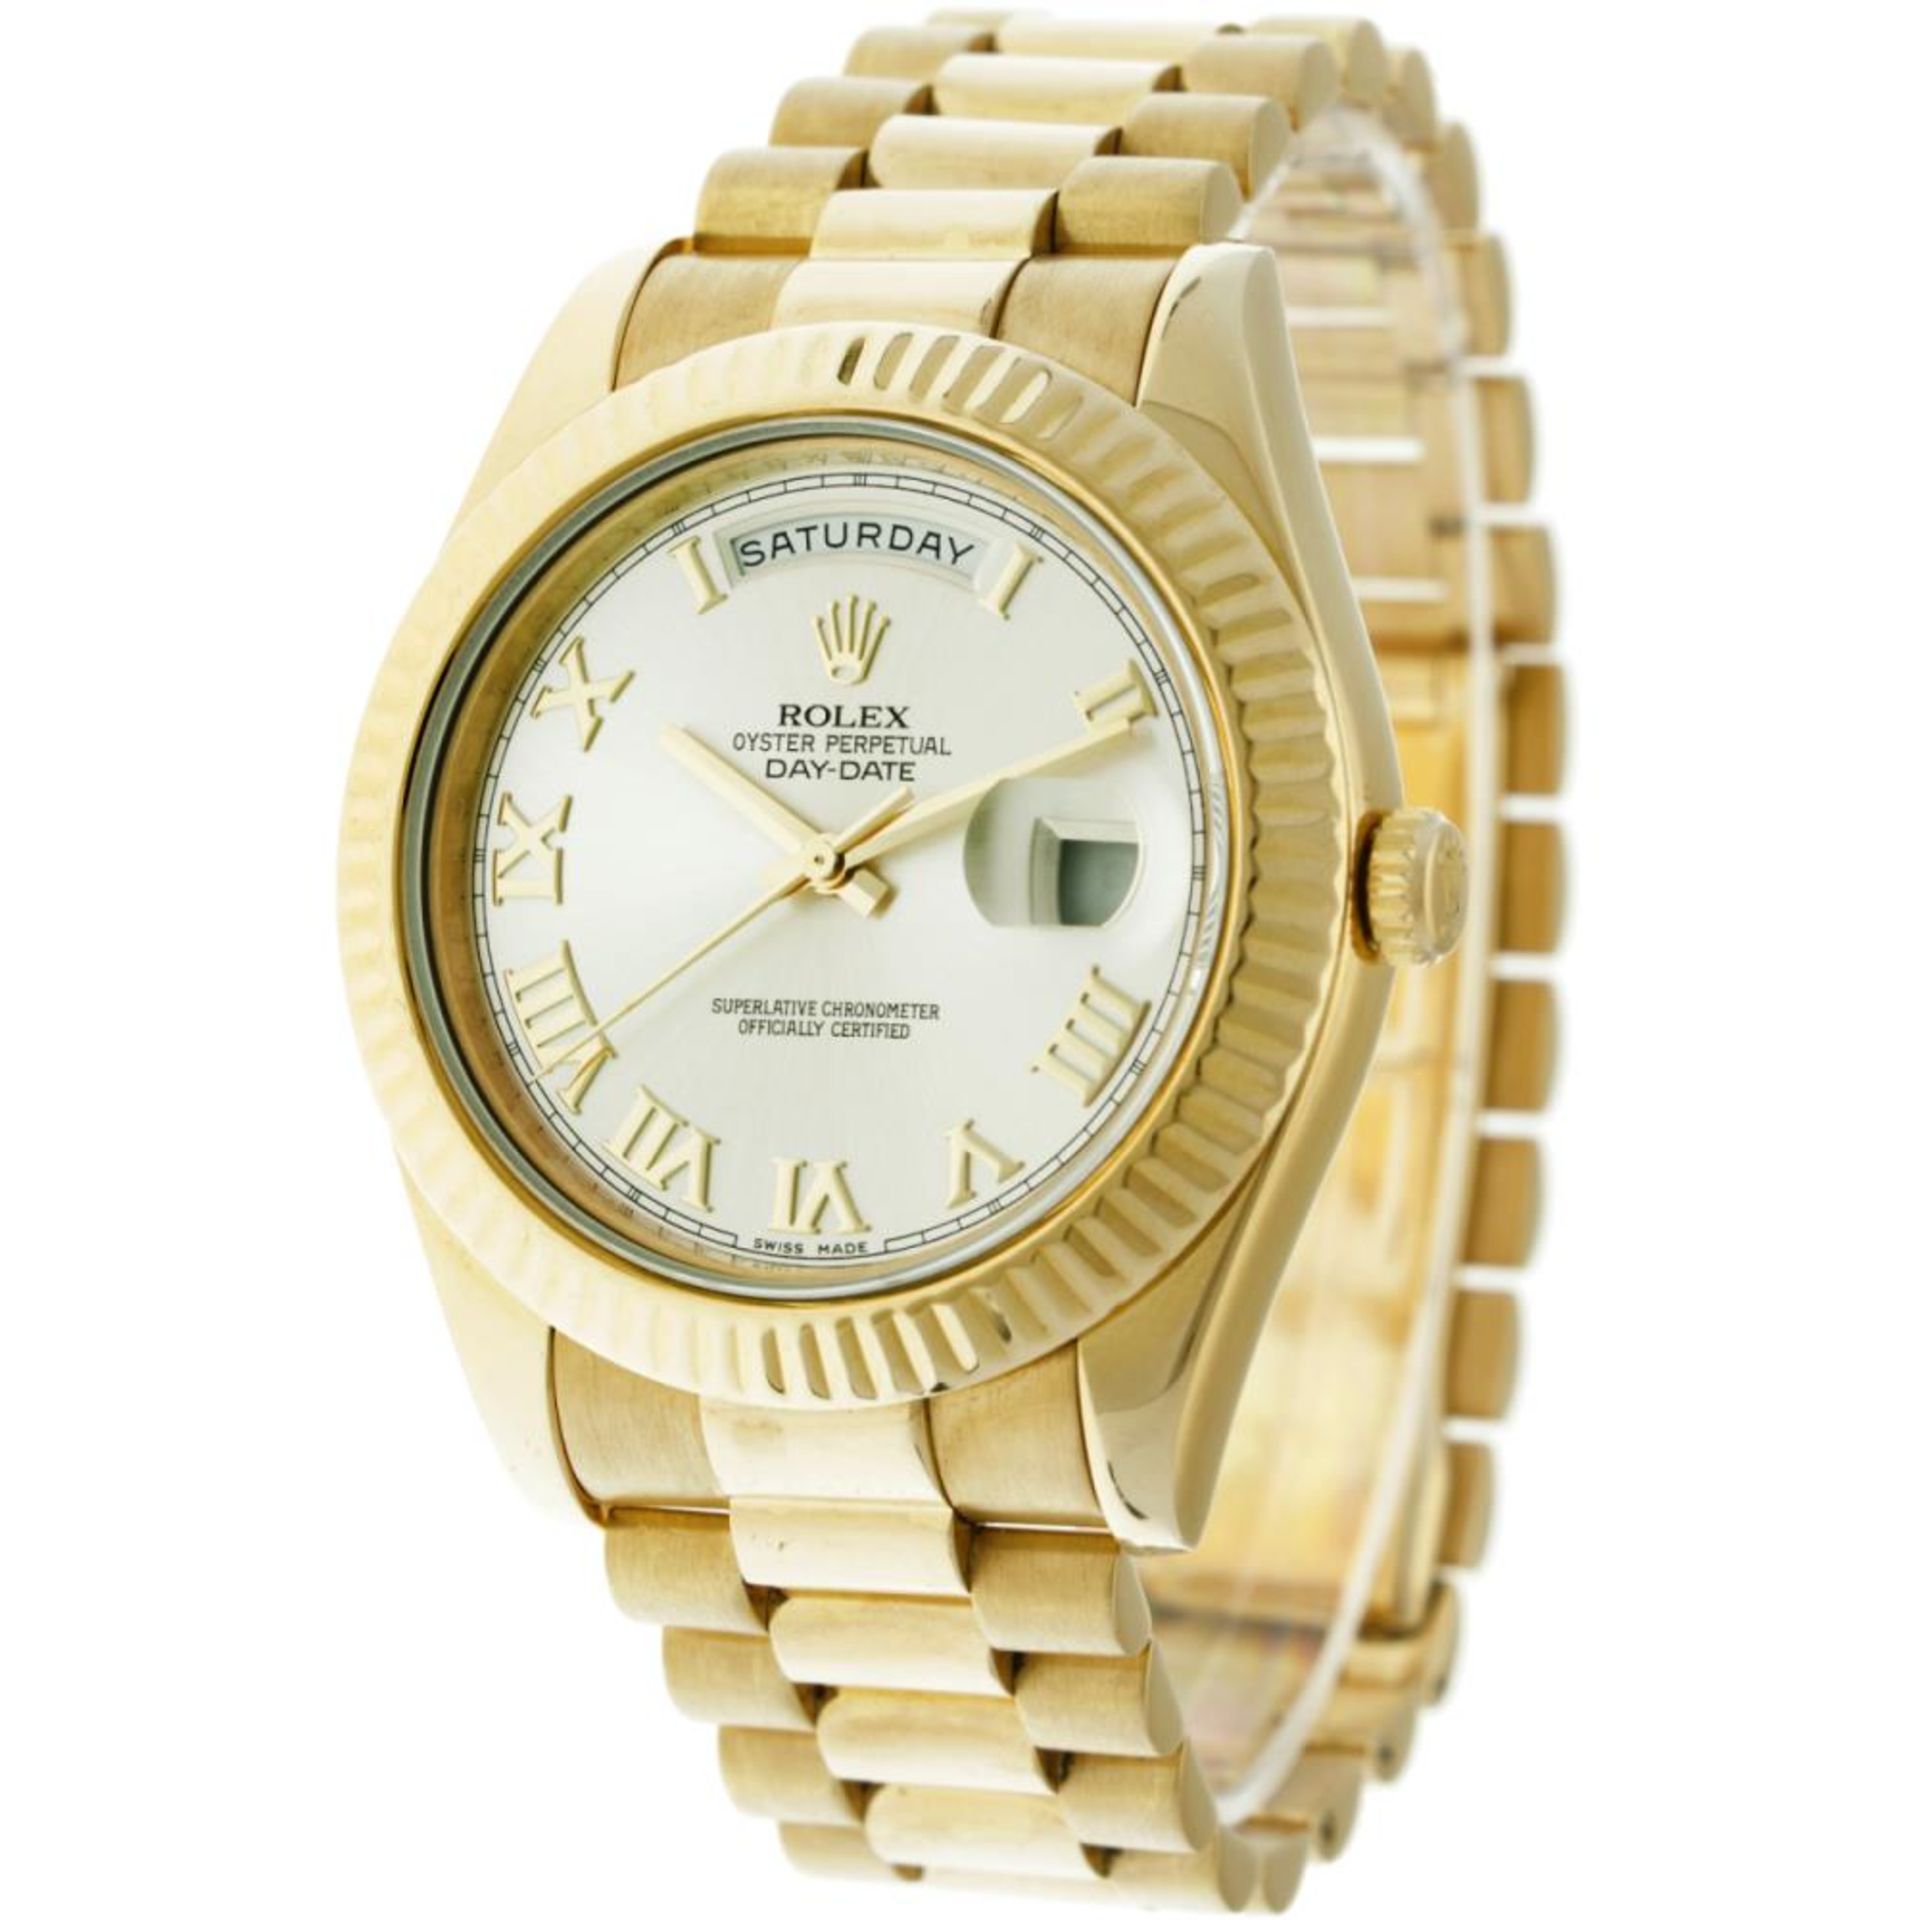 Rolex Day-Date 218238 - Men's watch - apprx. 2011. - Image 2 of 9